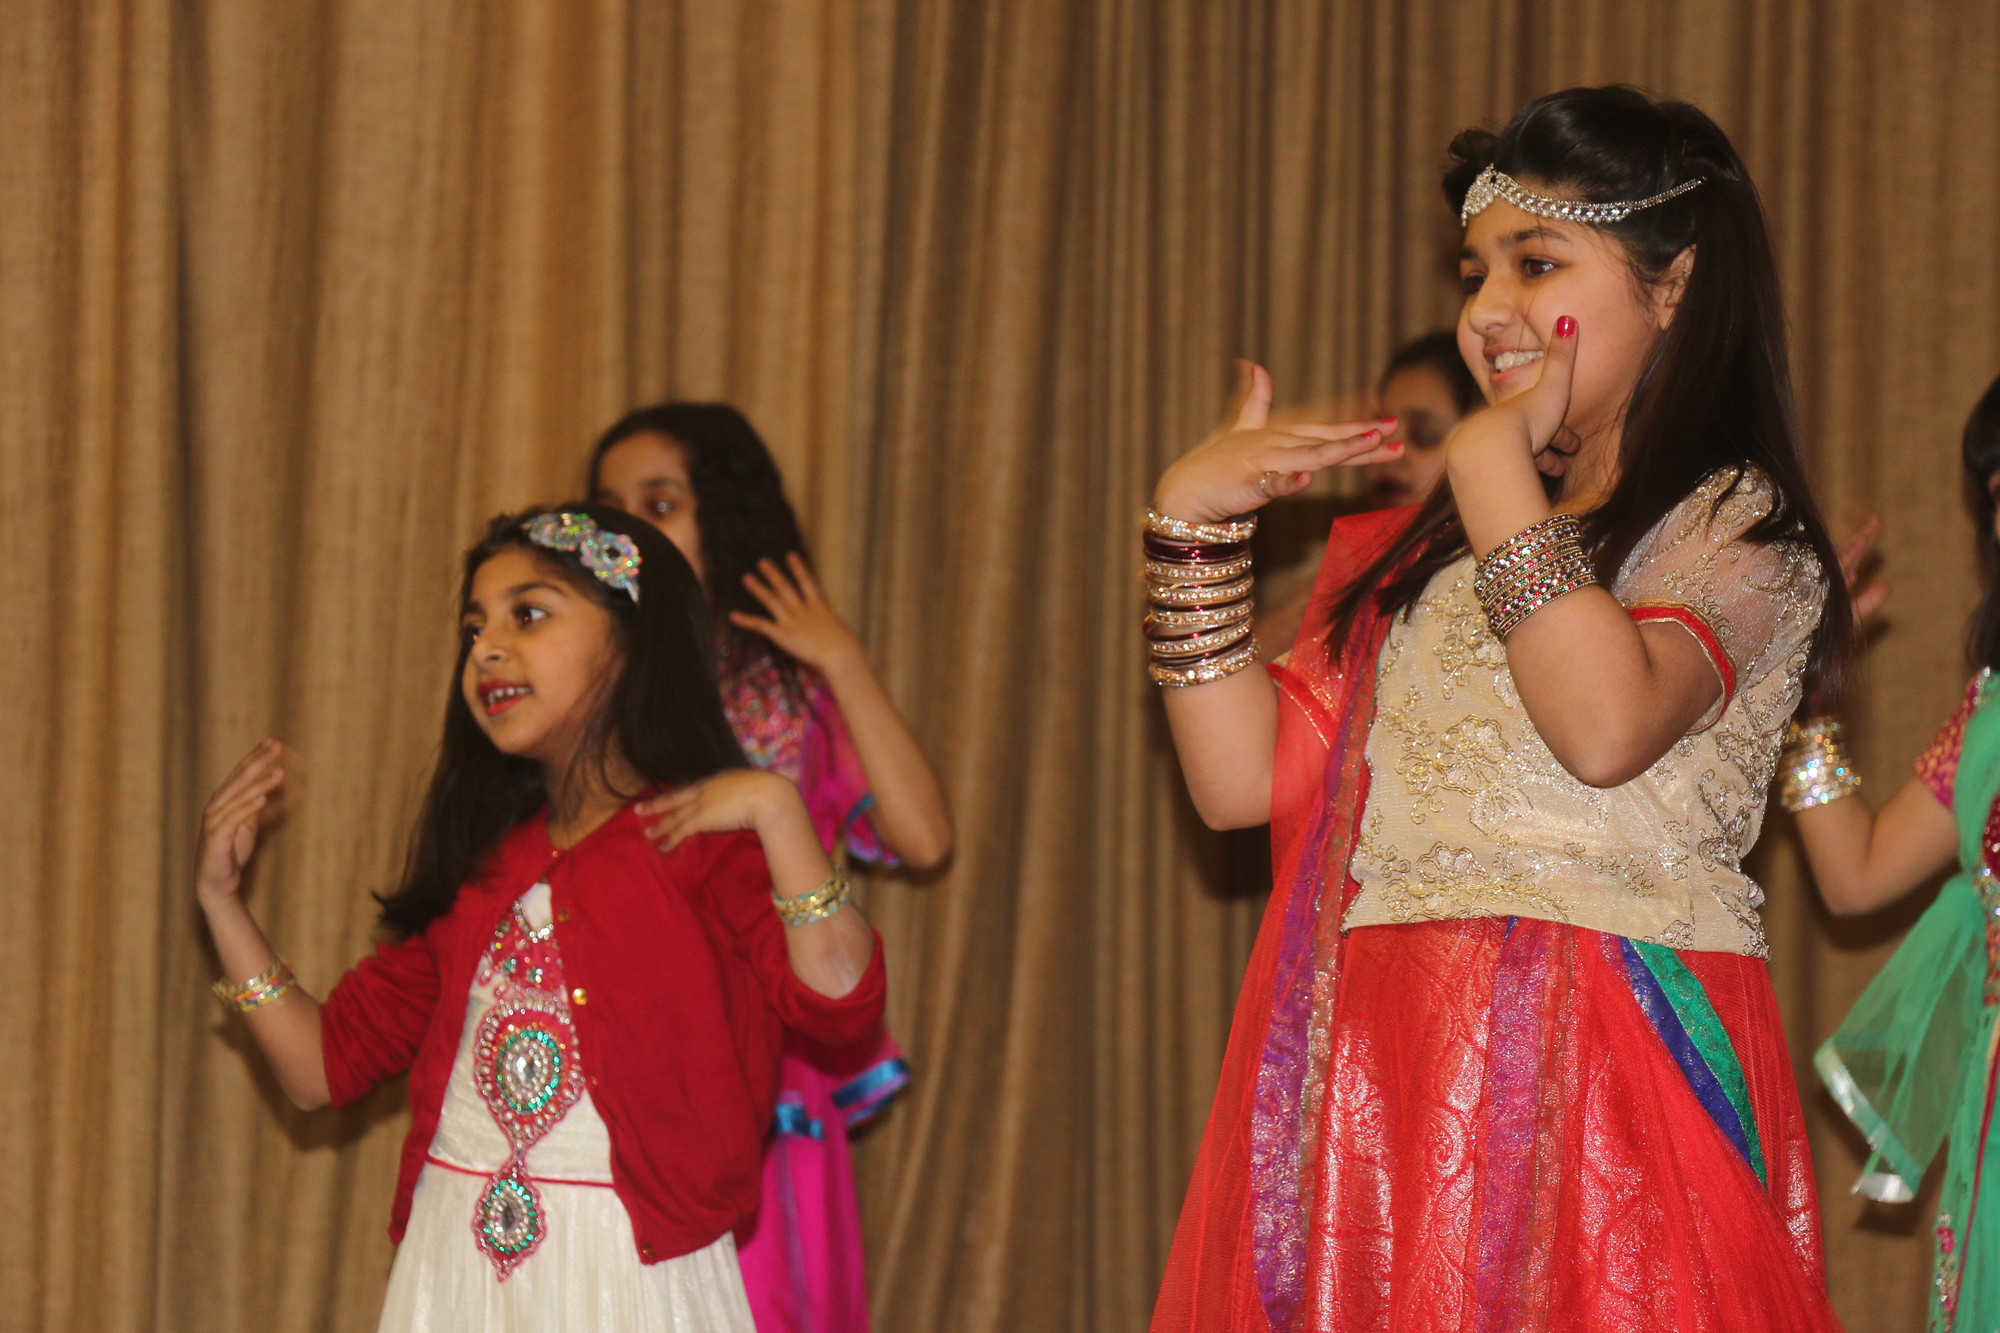 Yumna Junaid, left, and Jannet Ashraf never lost their smiles as they danced.